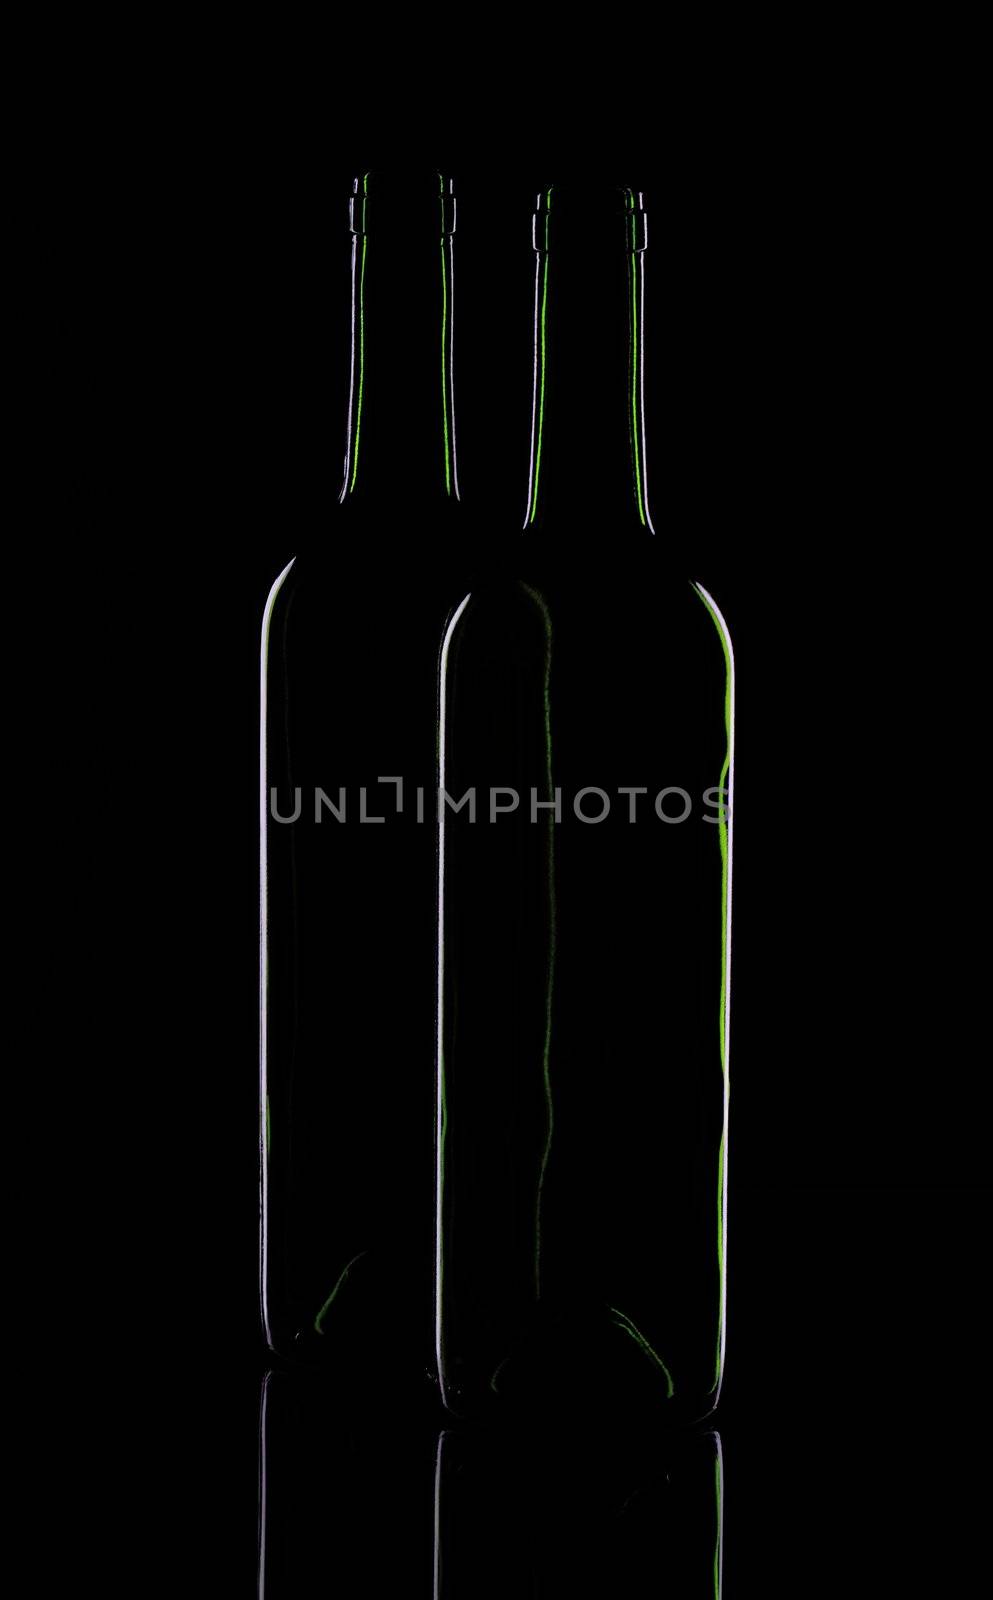 Two wine bottles on a black background